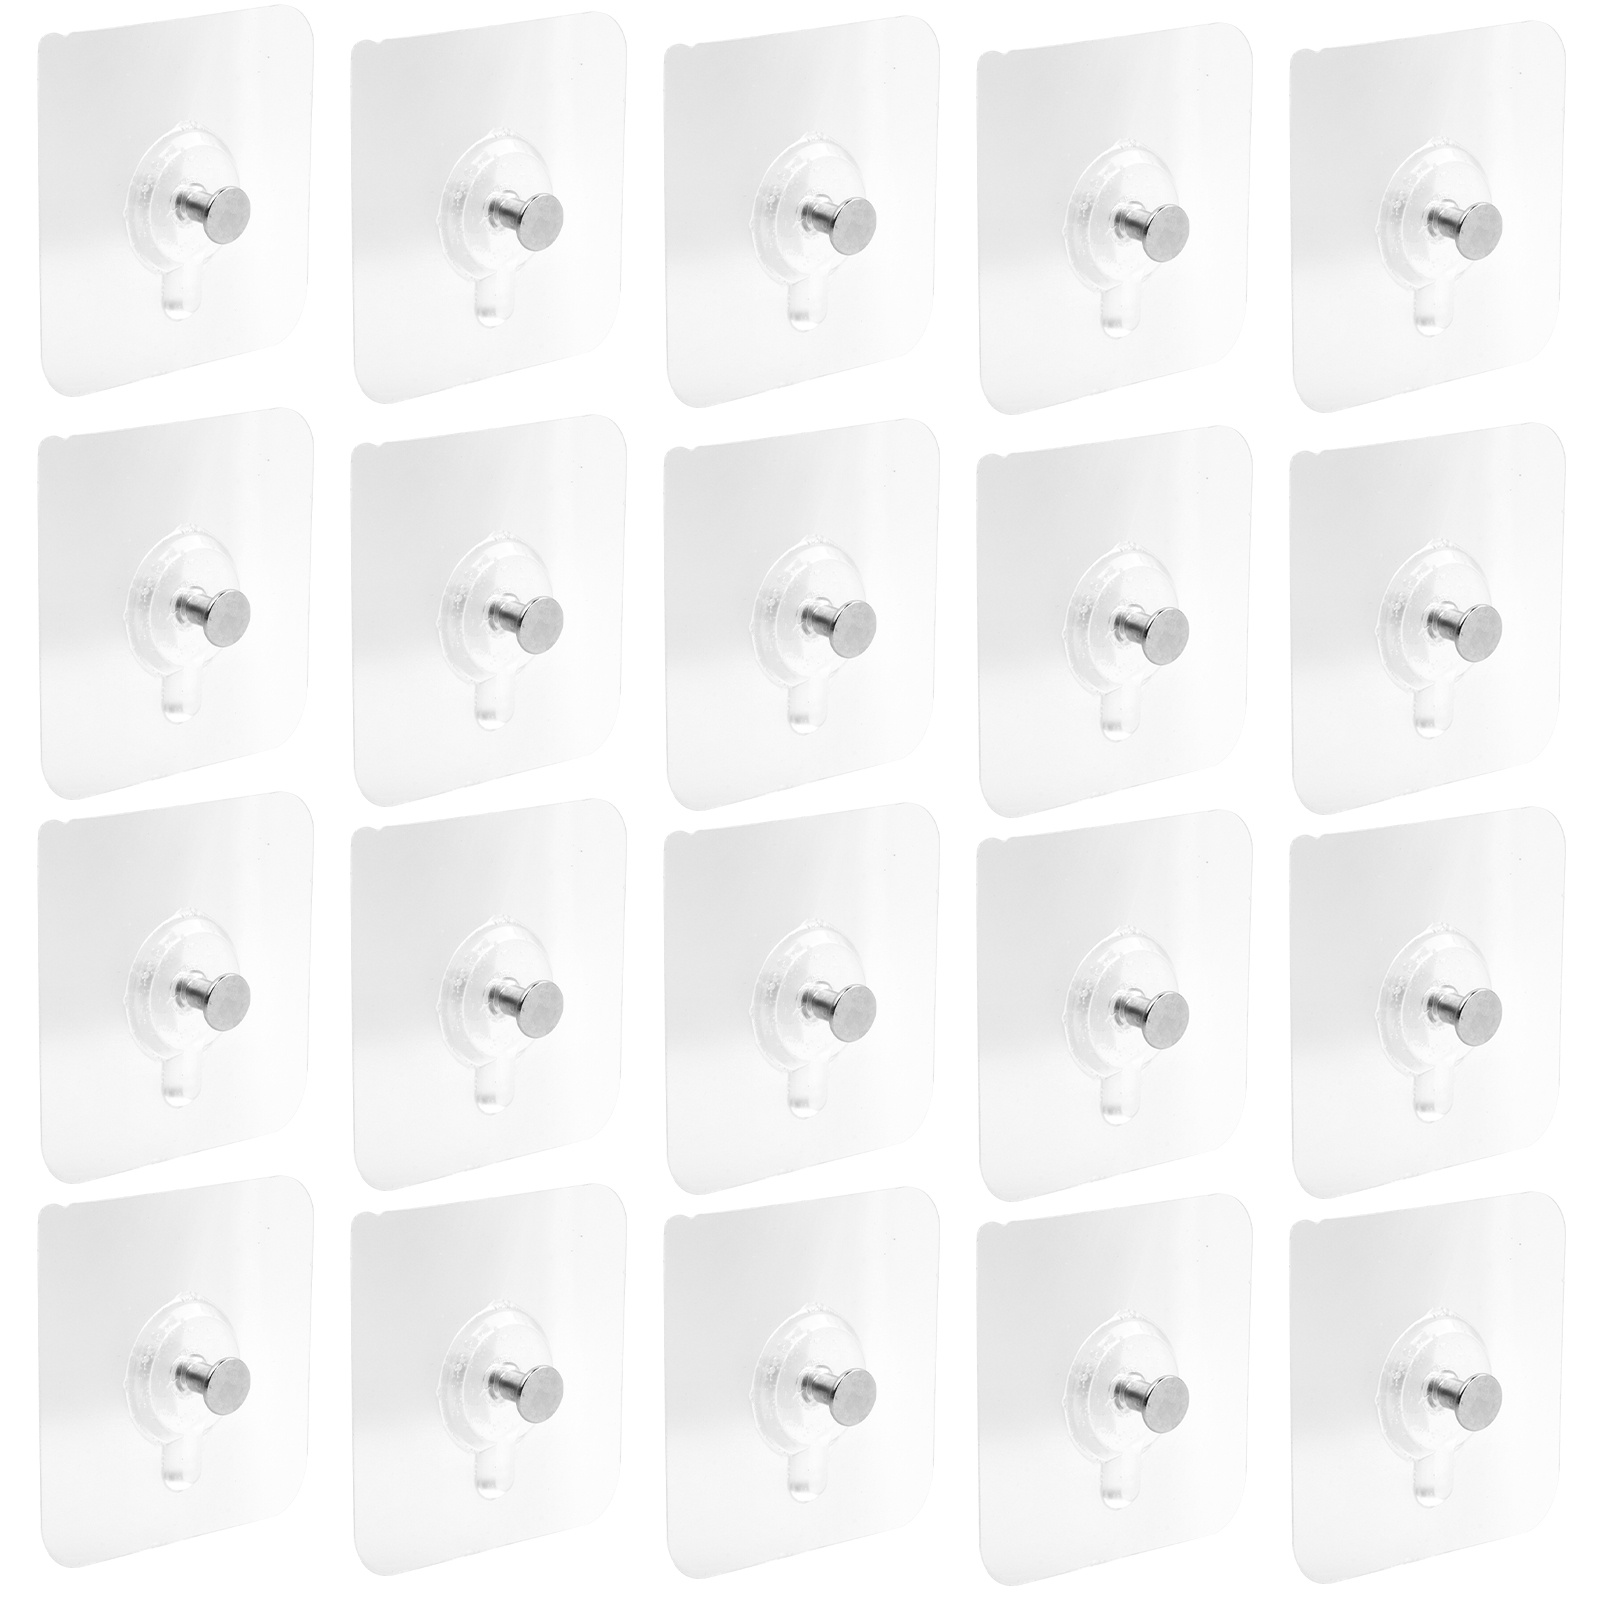 

20pcs Self Adhesive Wall Nail Hooks, Waterproof Transparent Hook Without Drilling, Wall Mounted Traceless Hanging Nail, For Photos, Picture Frames, Posters, Etc